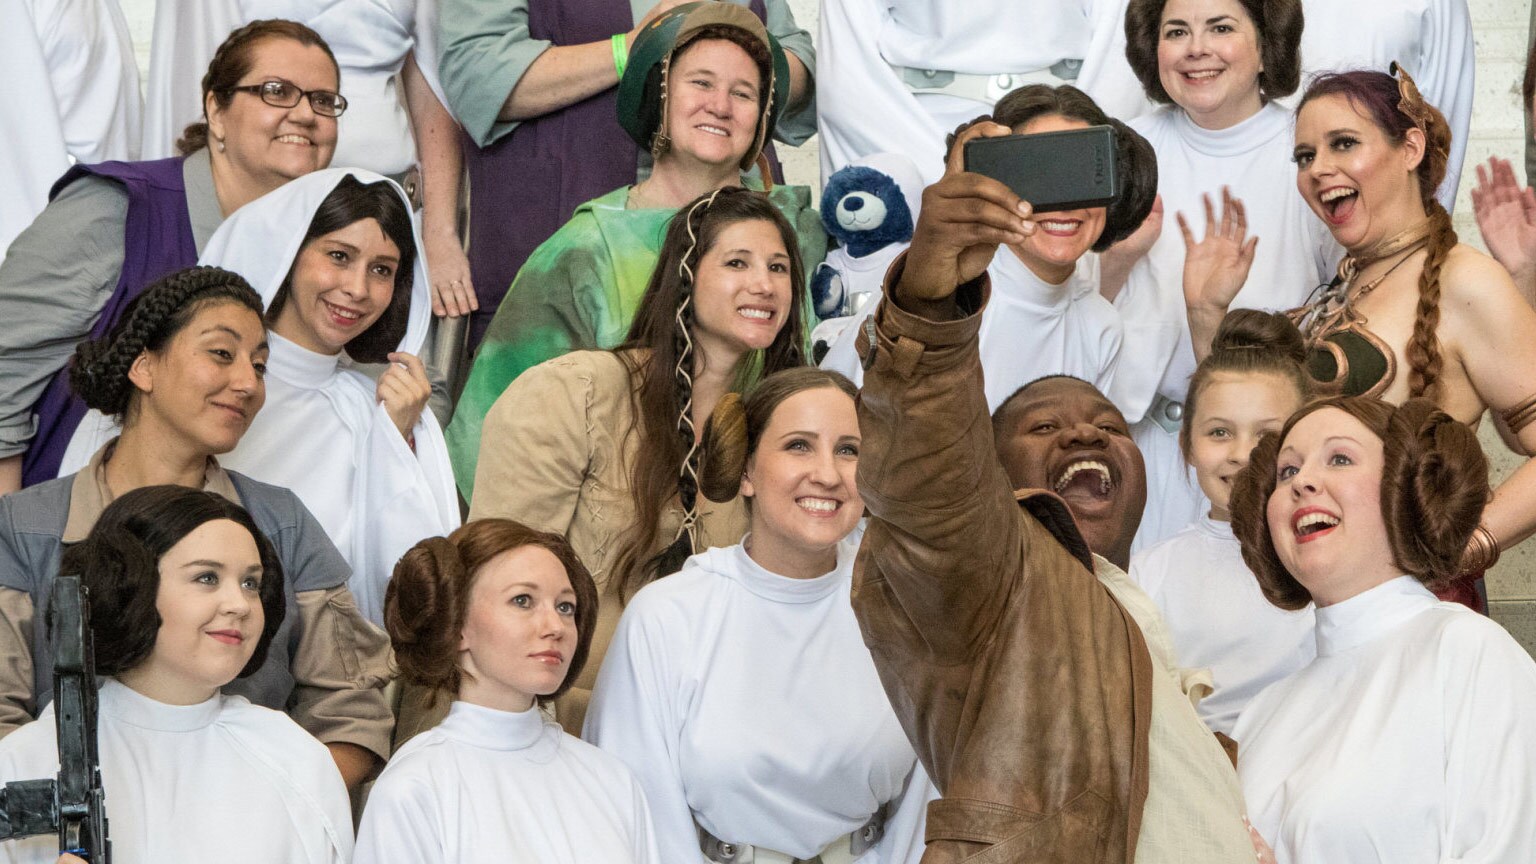 A Finn cosplayer takes a selfie with a large group of Princess Leia cosplayers.